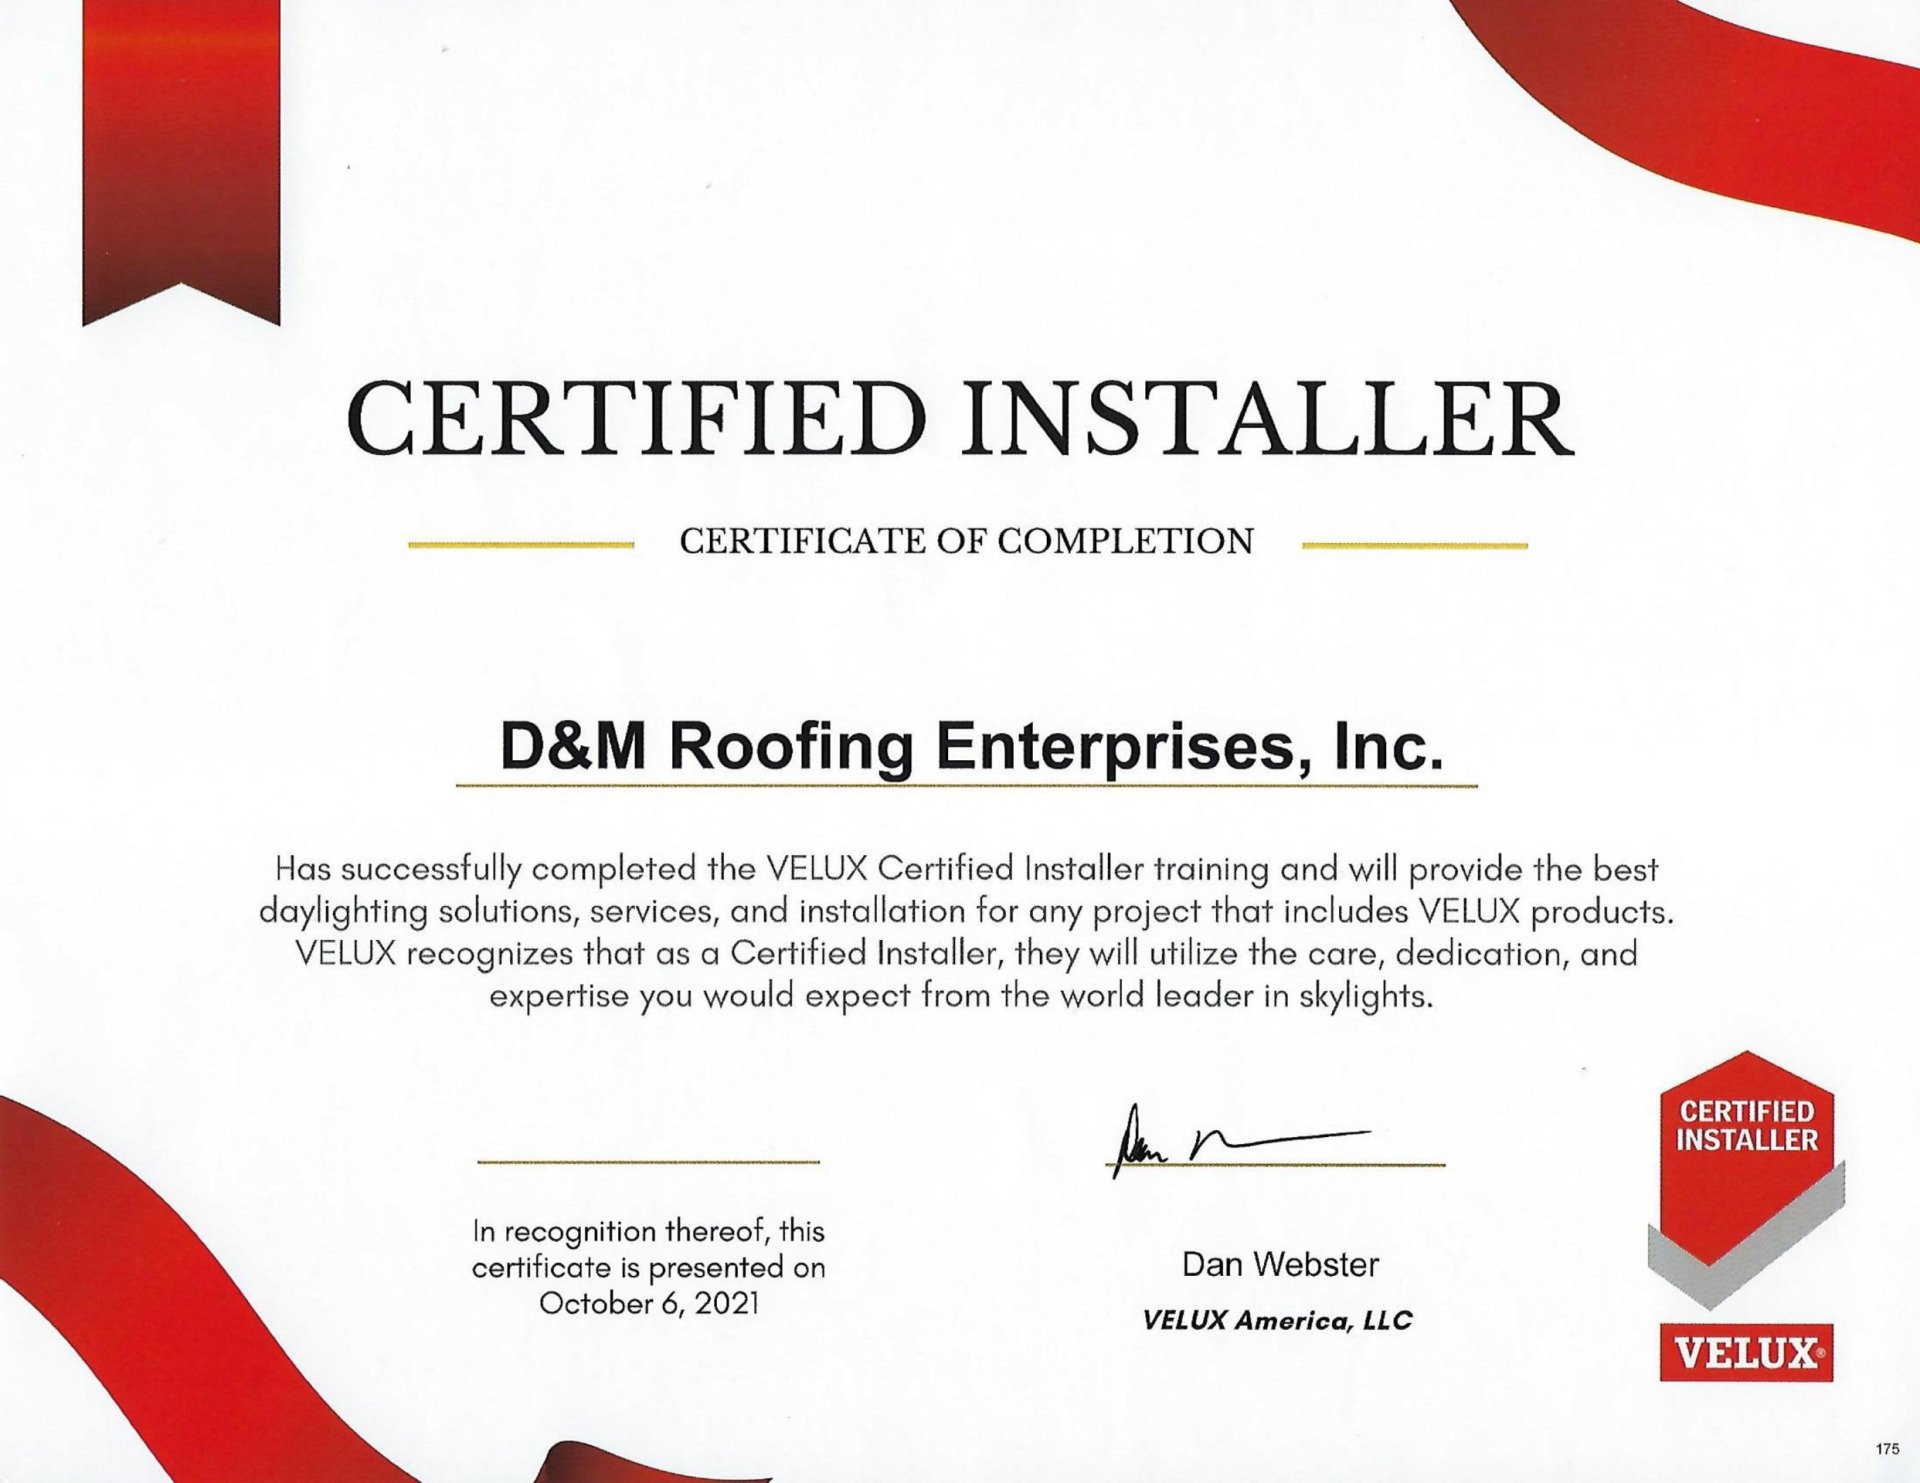 A certified installer certificate from d & m roofing enterprises , inc.